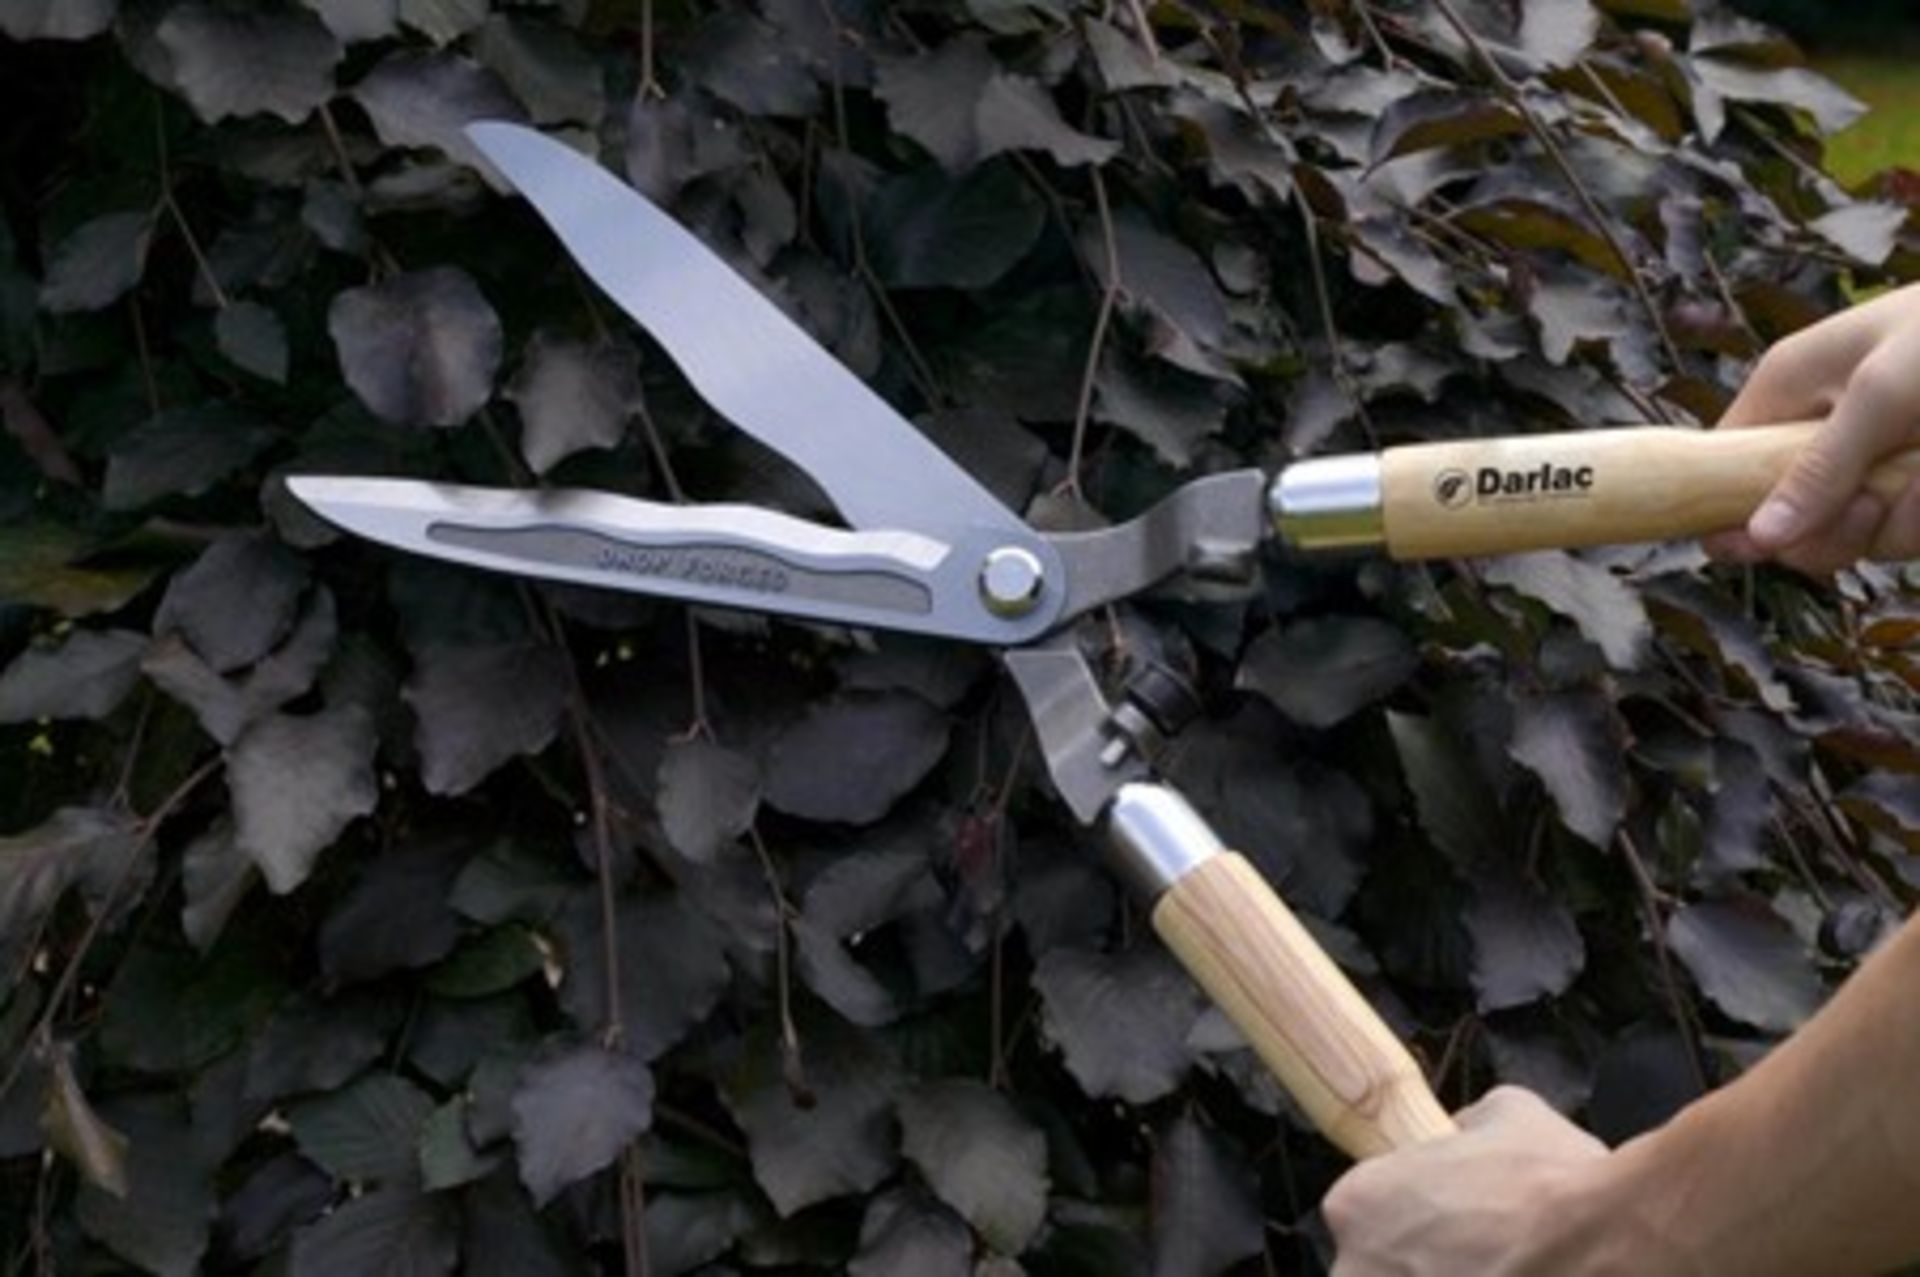 RRP £34.99 - New Darlac Wooden Handled Drop Forged Shears